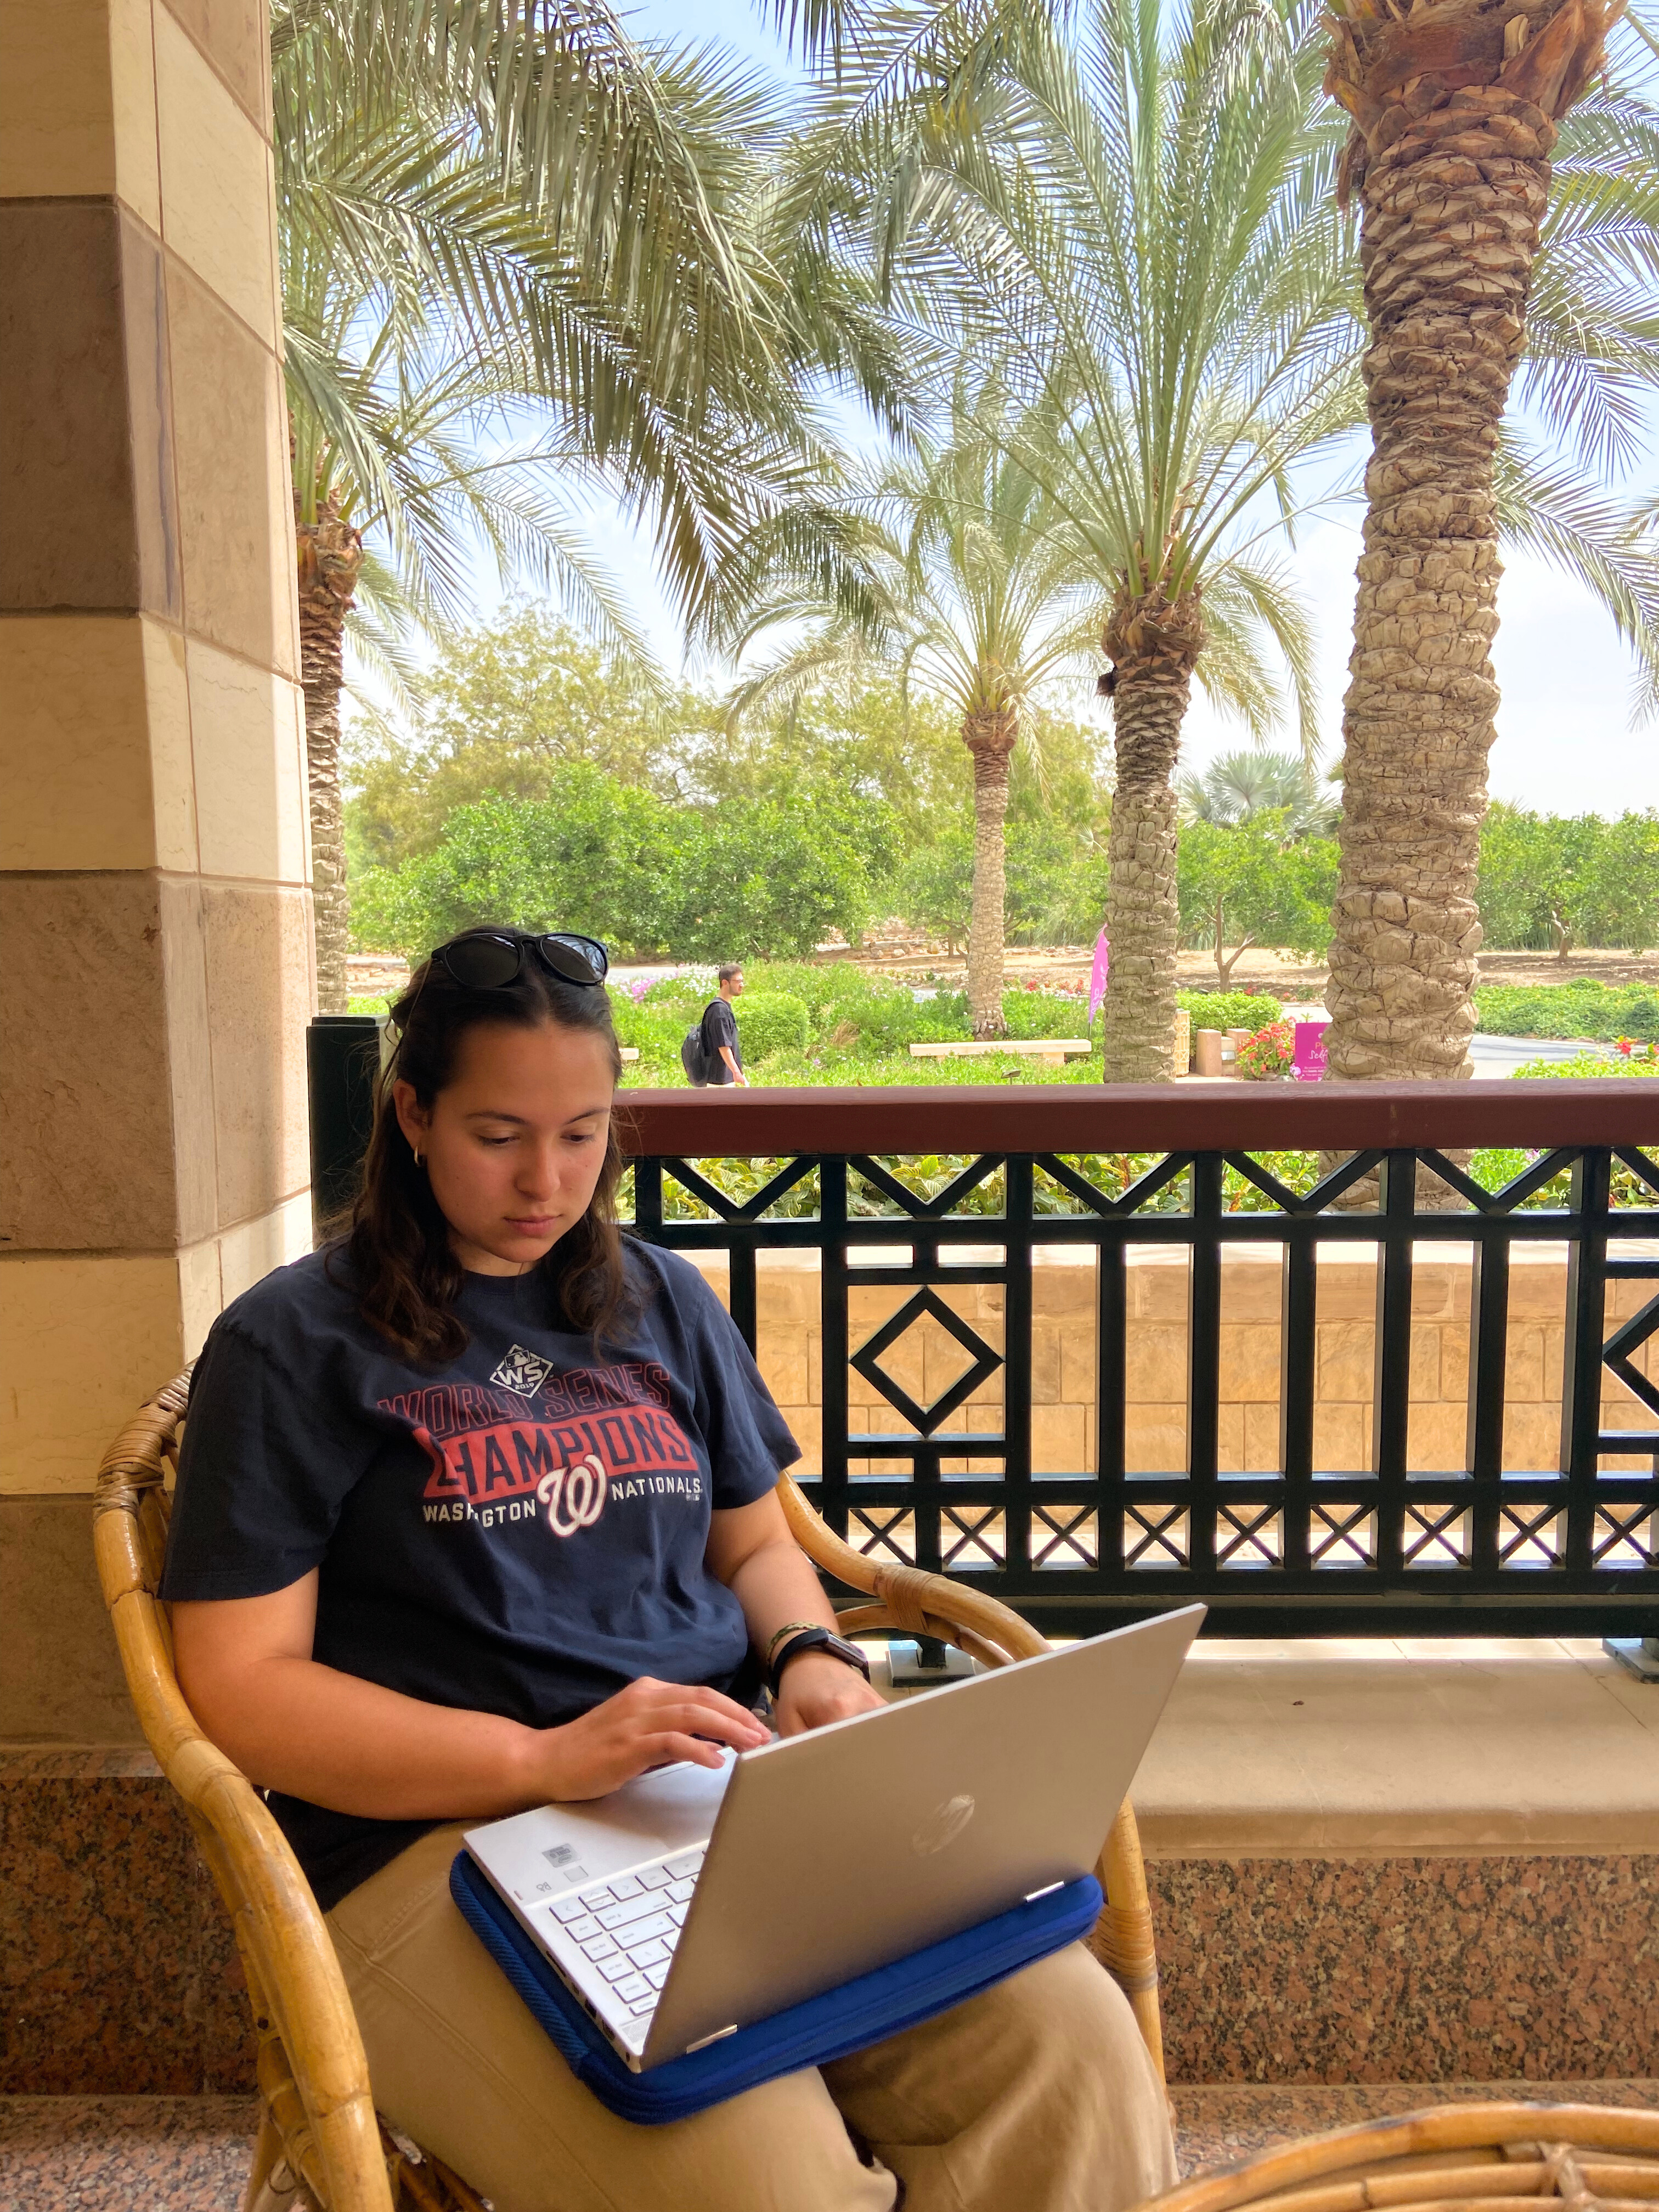 McDermott sits at a table behind the administration building, working on a laptop. The garden is visible behind her and there is a young man walking in the background.  